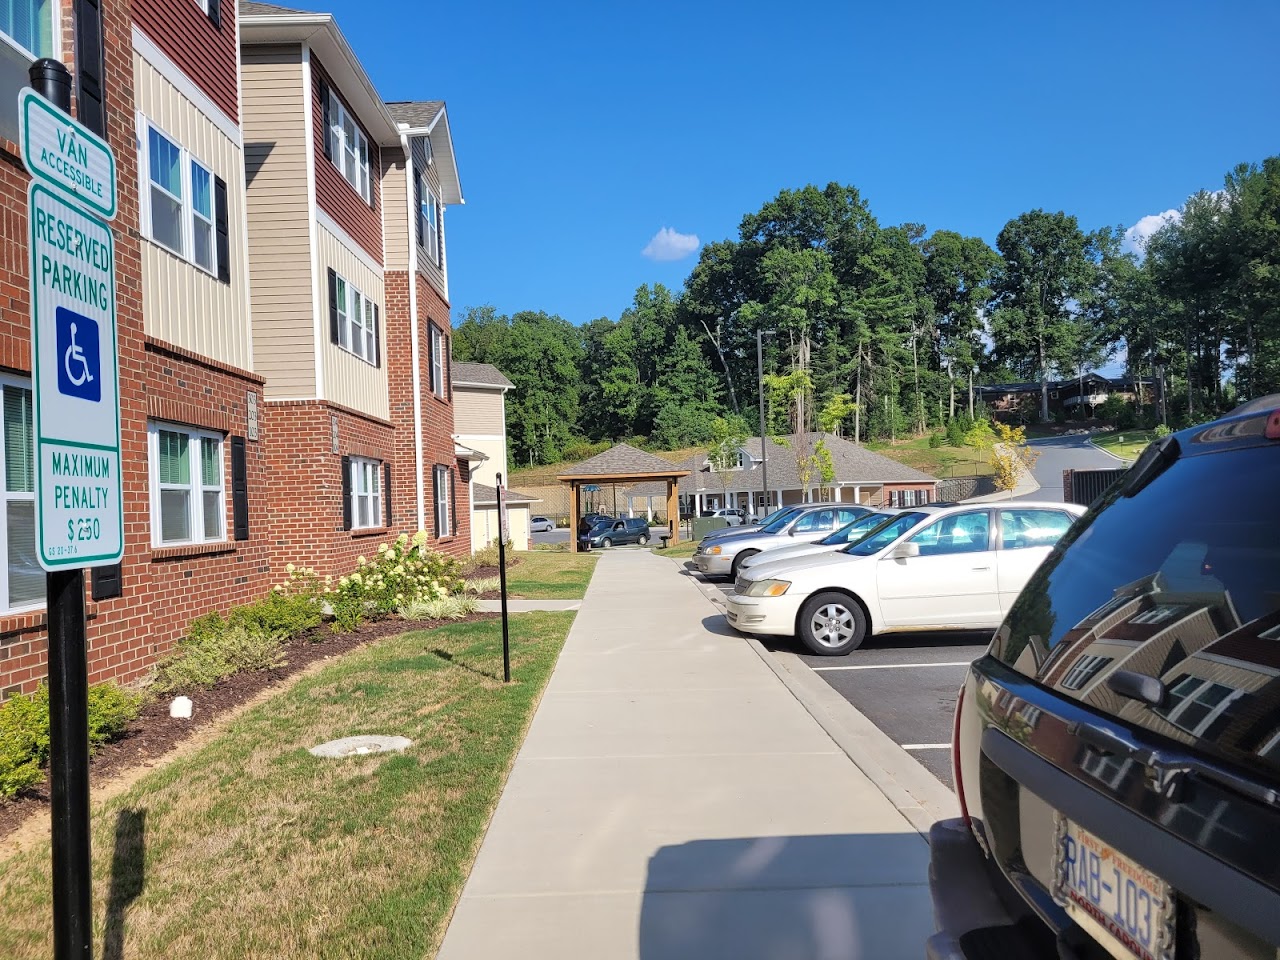 Photo of WOODLANE STREET APARTMENTS. Affordable housing located at 113 WOODLANE STREET EXT GRANITE FALLS, NC 28630